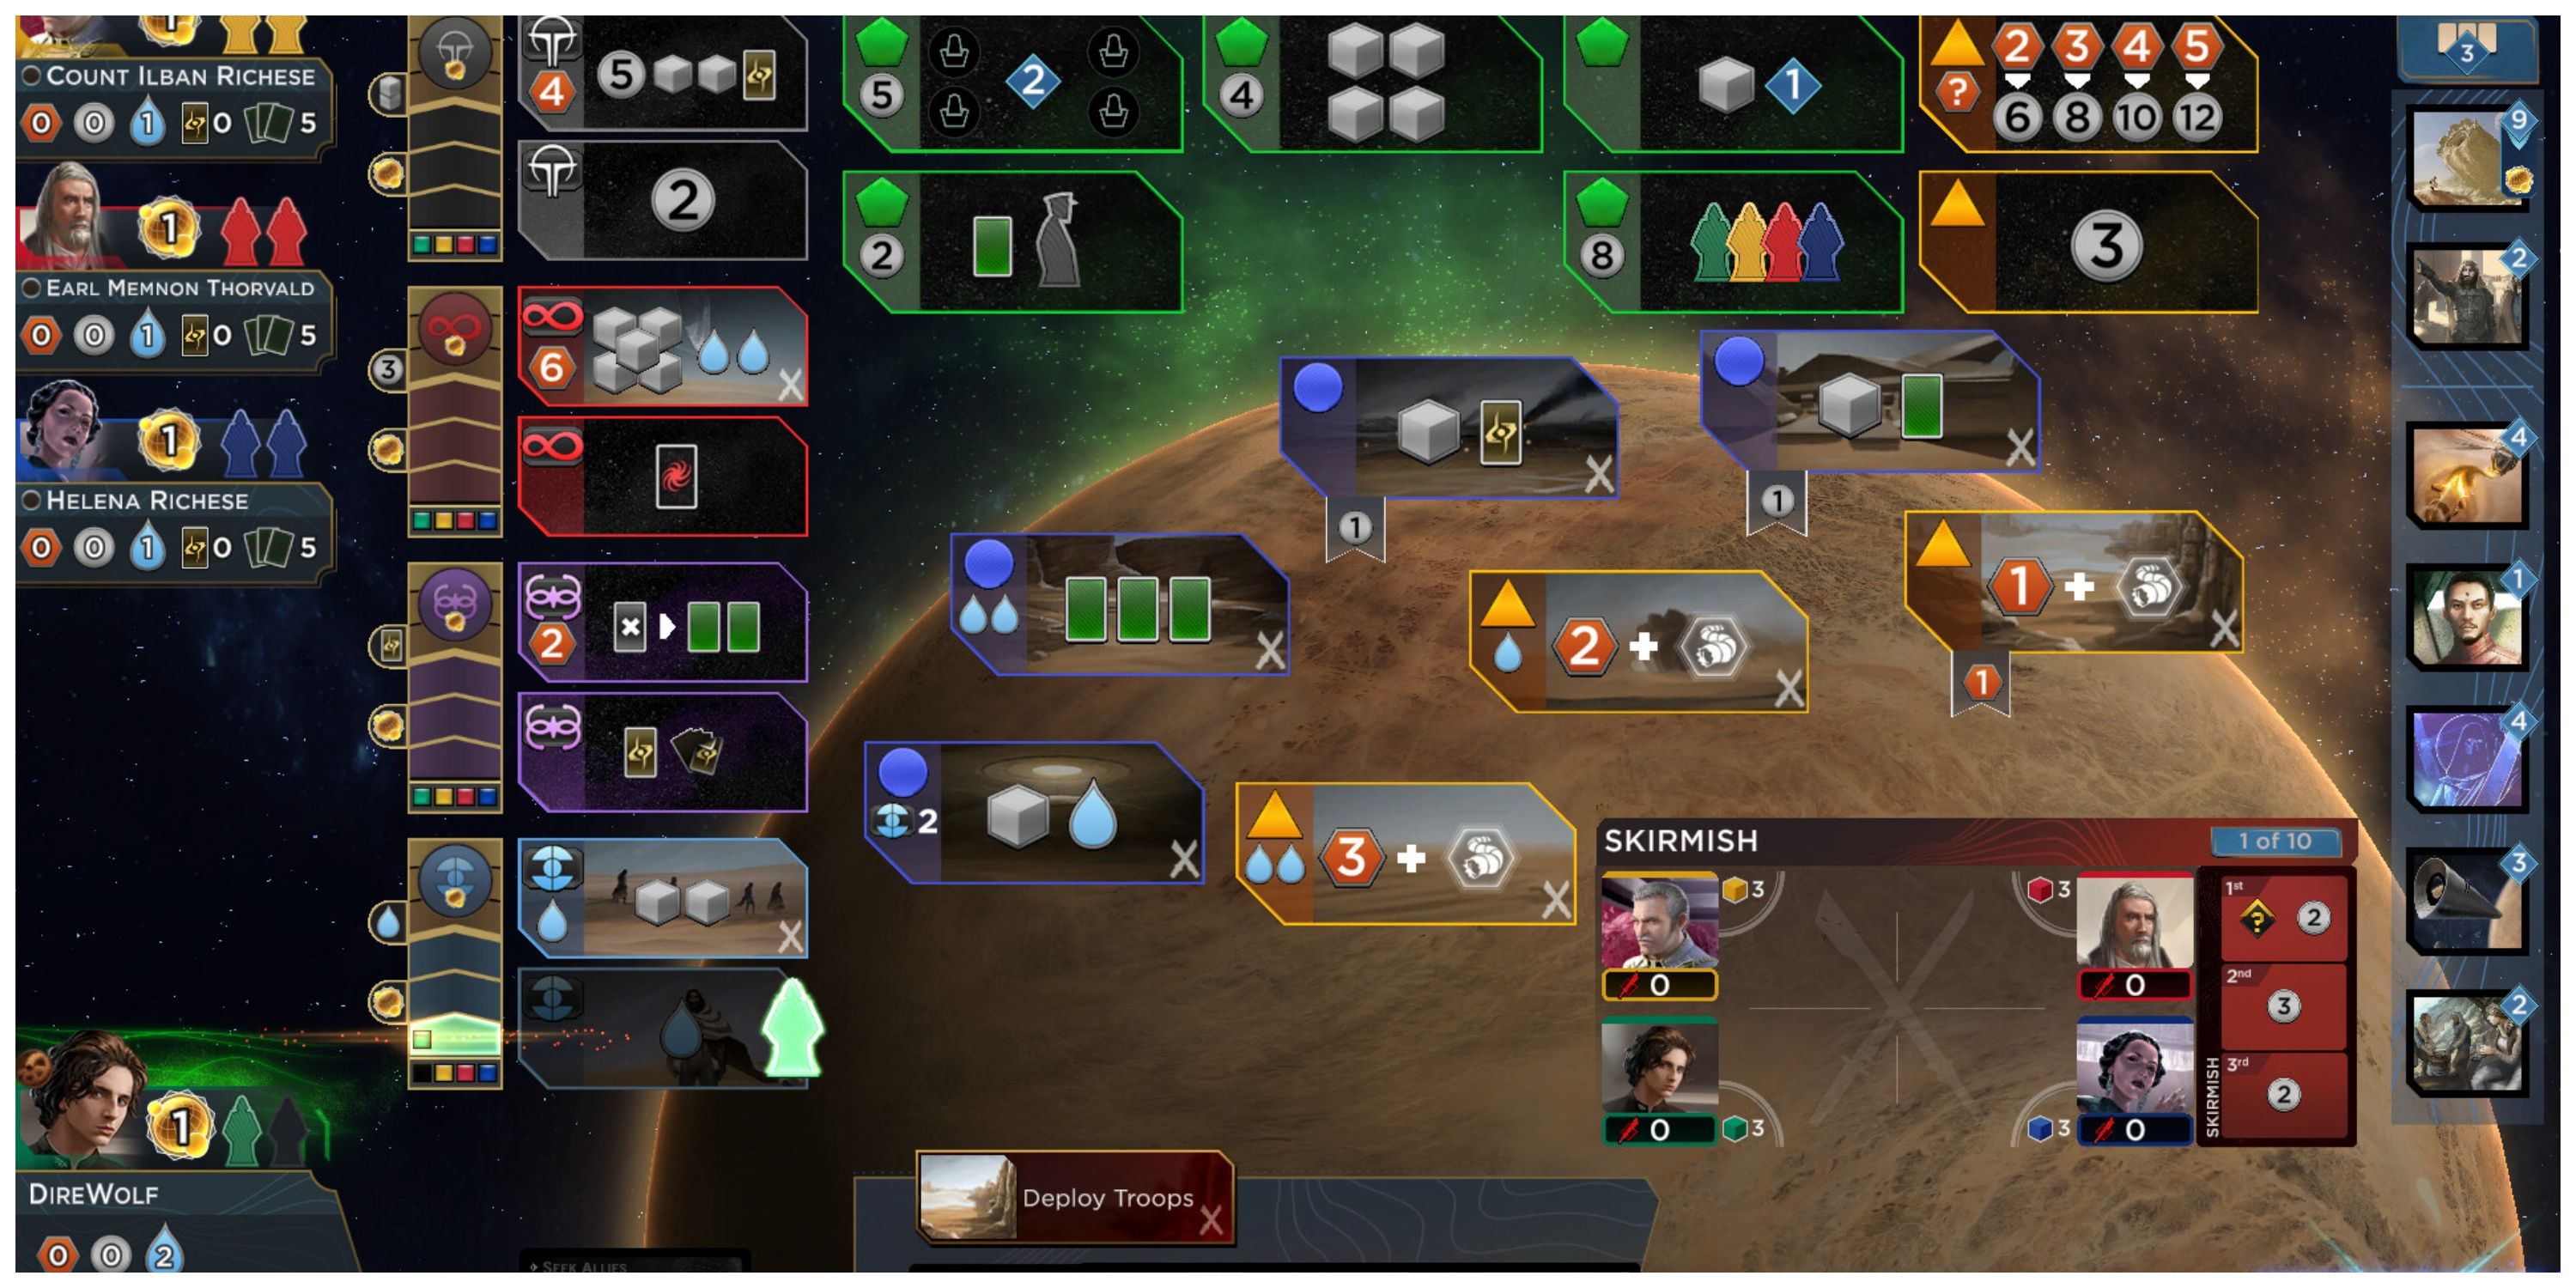 Dune: Imperium - Steam Store Page Screenshot (Board View)